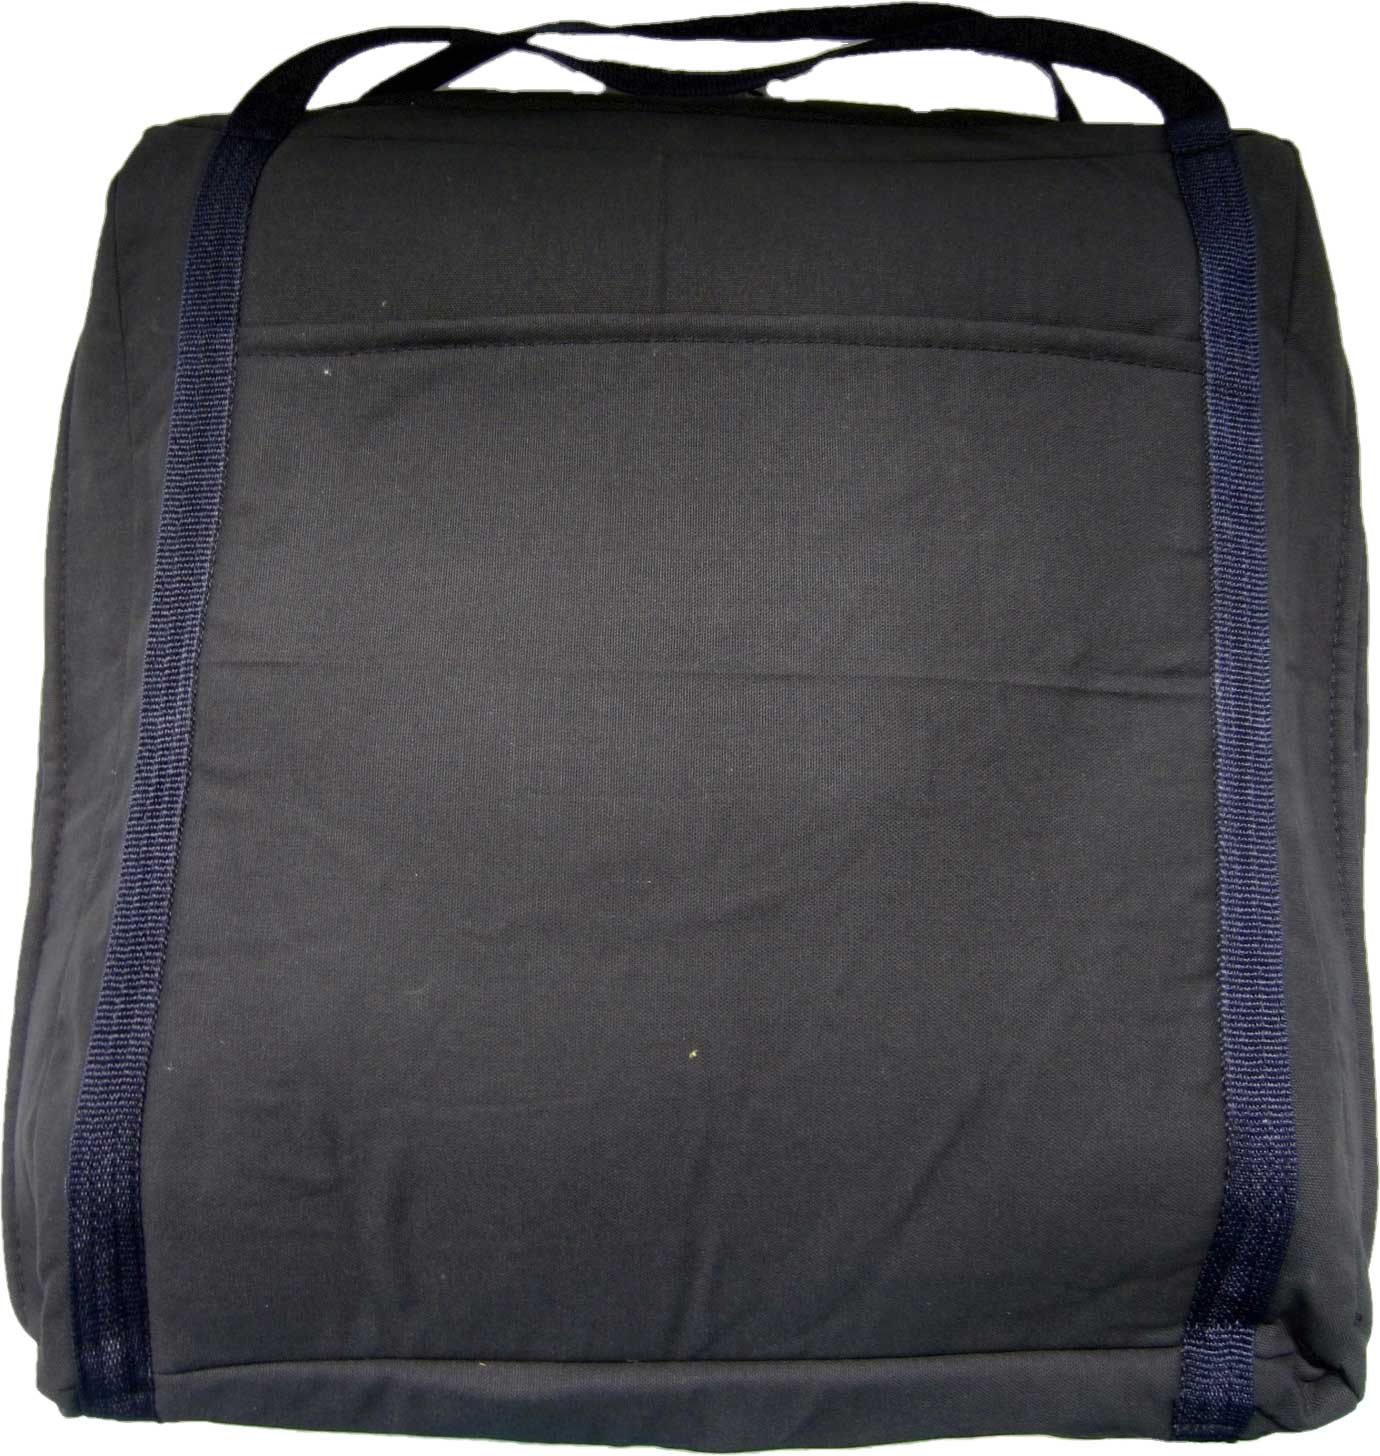 Carrying Bag For Mirror Assembly 